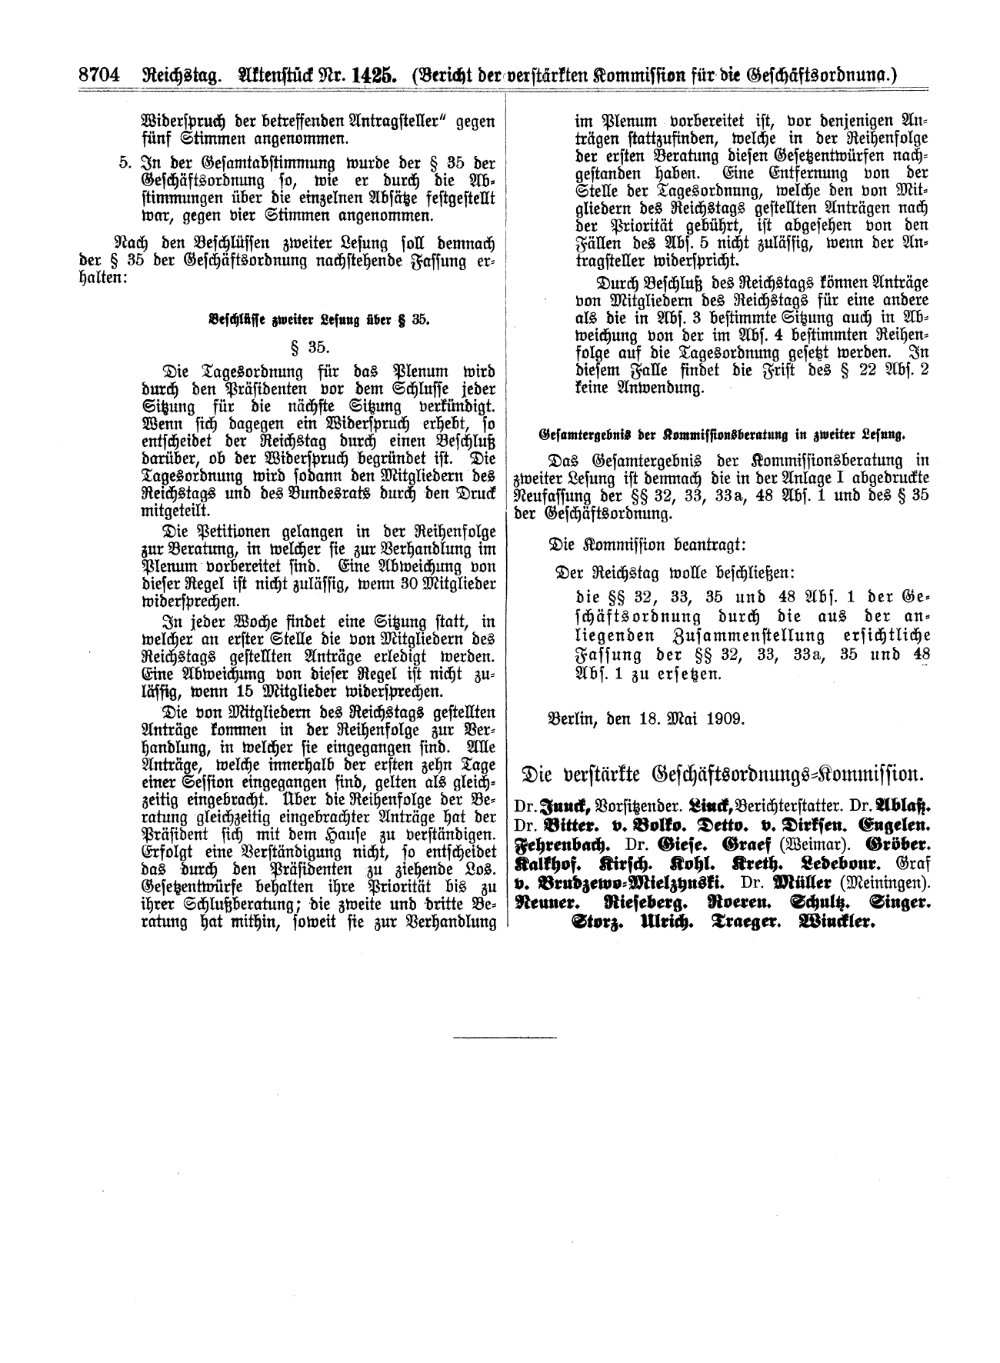 Scan of page 8704